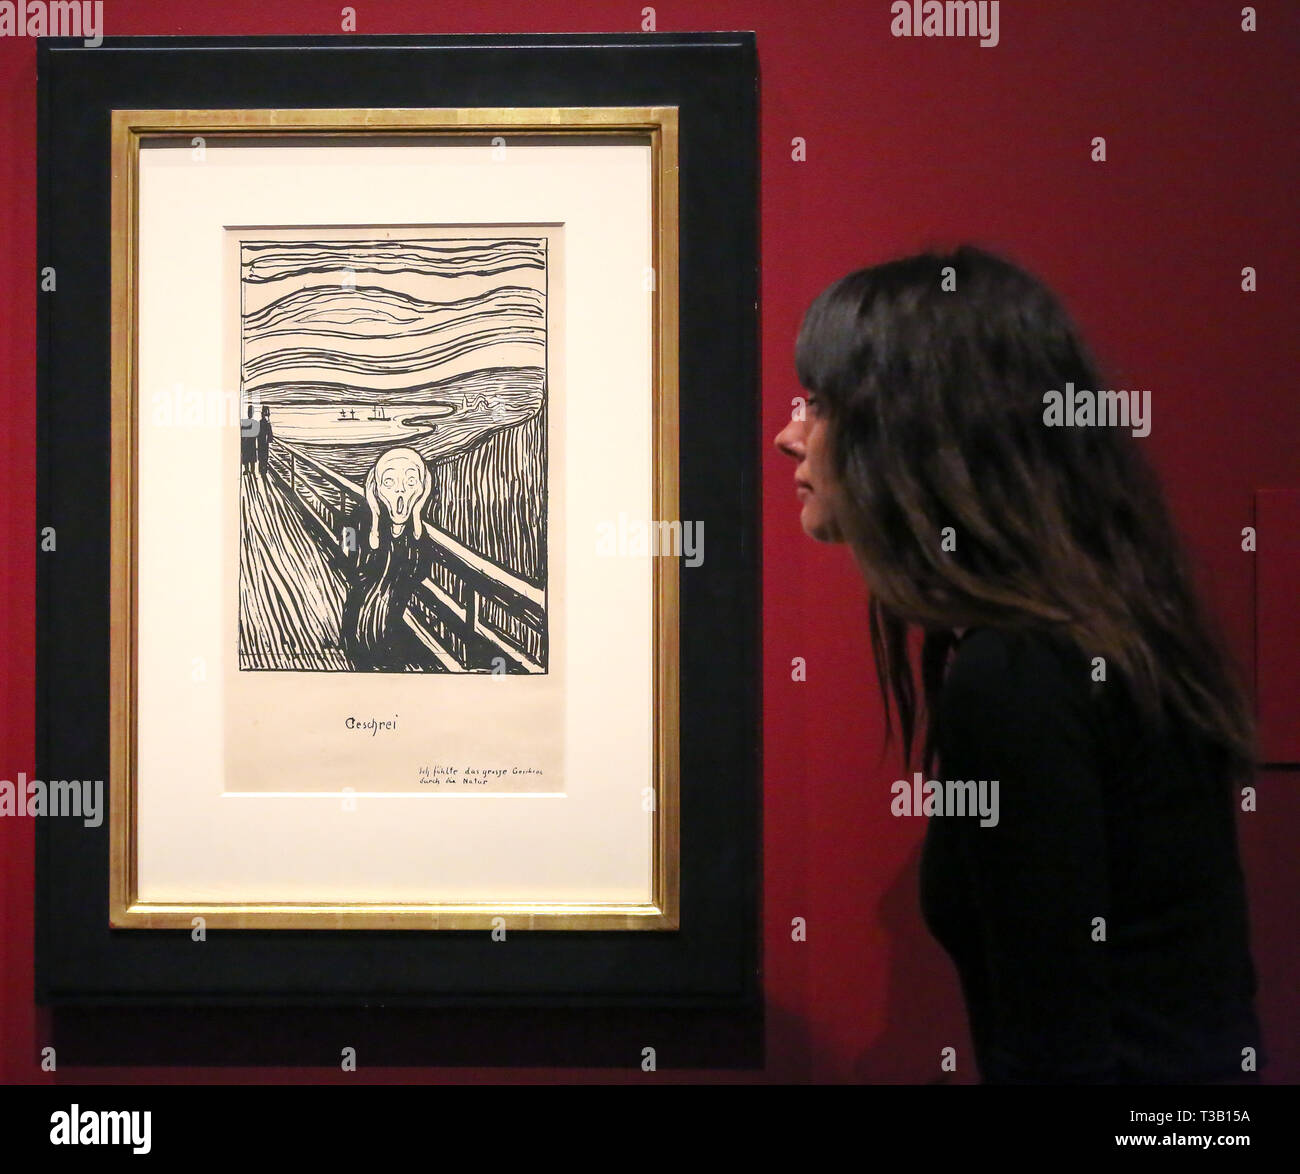 The British Museum. London, UK 8 April 2019 - A staff member views Edvard Munch's “The Scream, 1895” - which developed from an episode represented in Despair, but with the central figure turned to face the viewer. The swirling reddish-blue clouds are translated in this print into compressed undulating bands of black and white that emphasise the acute panic expressed by the figure. In a twist of fate, Munch's sister Laura was diagnosed in 1894 with schizophrenia and institutionalised in a hospital near the site of The Scream. Credit: Dinendra Haria/Alamy Live News Stock Photo